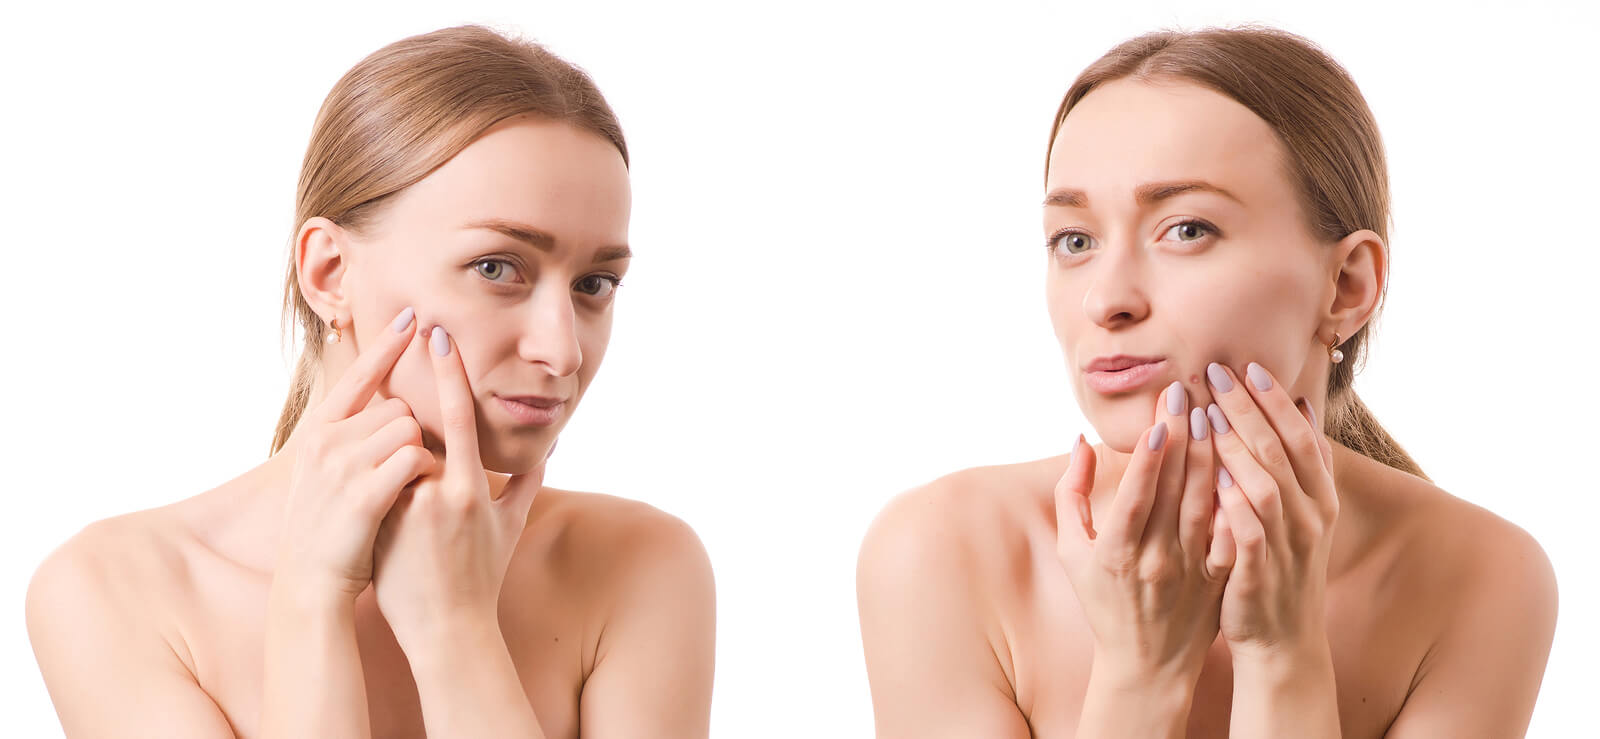 Cold Sore or Pimple? How to Spot the Difference